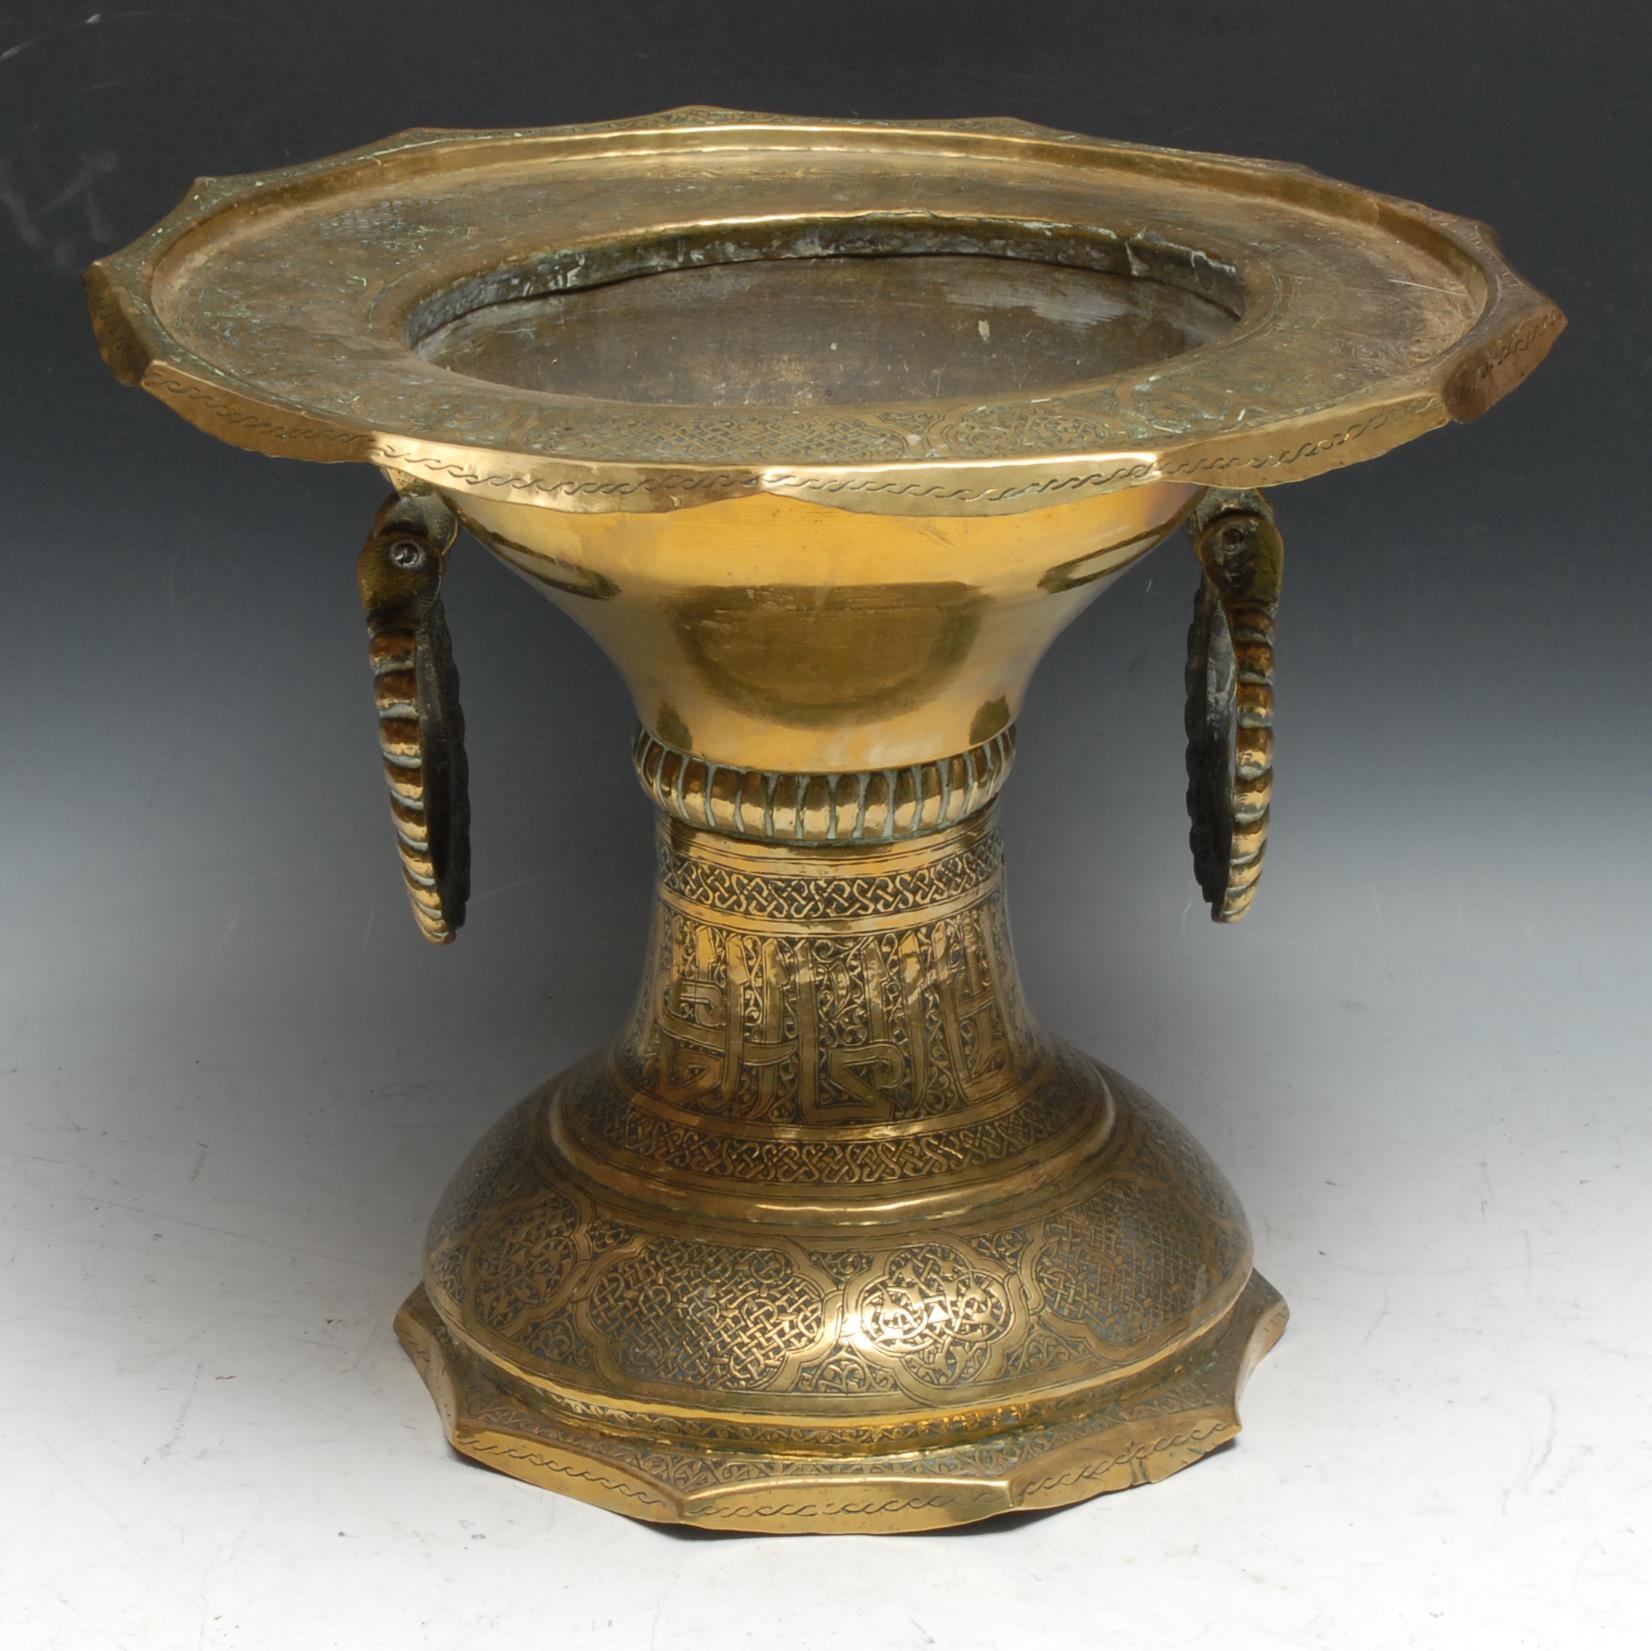 A Middle Eastern brass pedestal brazier, profusely chased in the Islamic taste with Arabic script